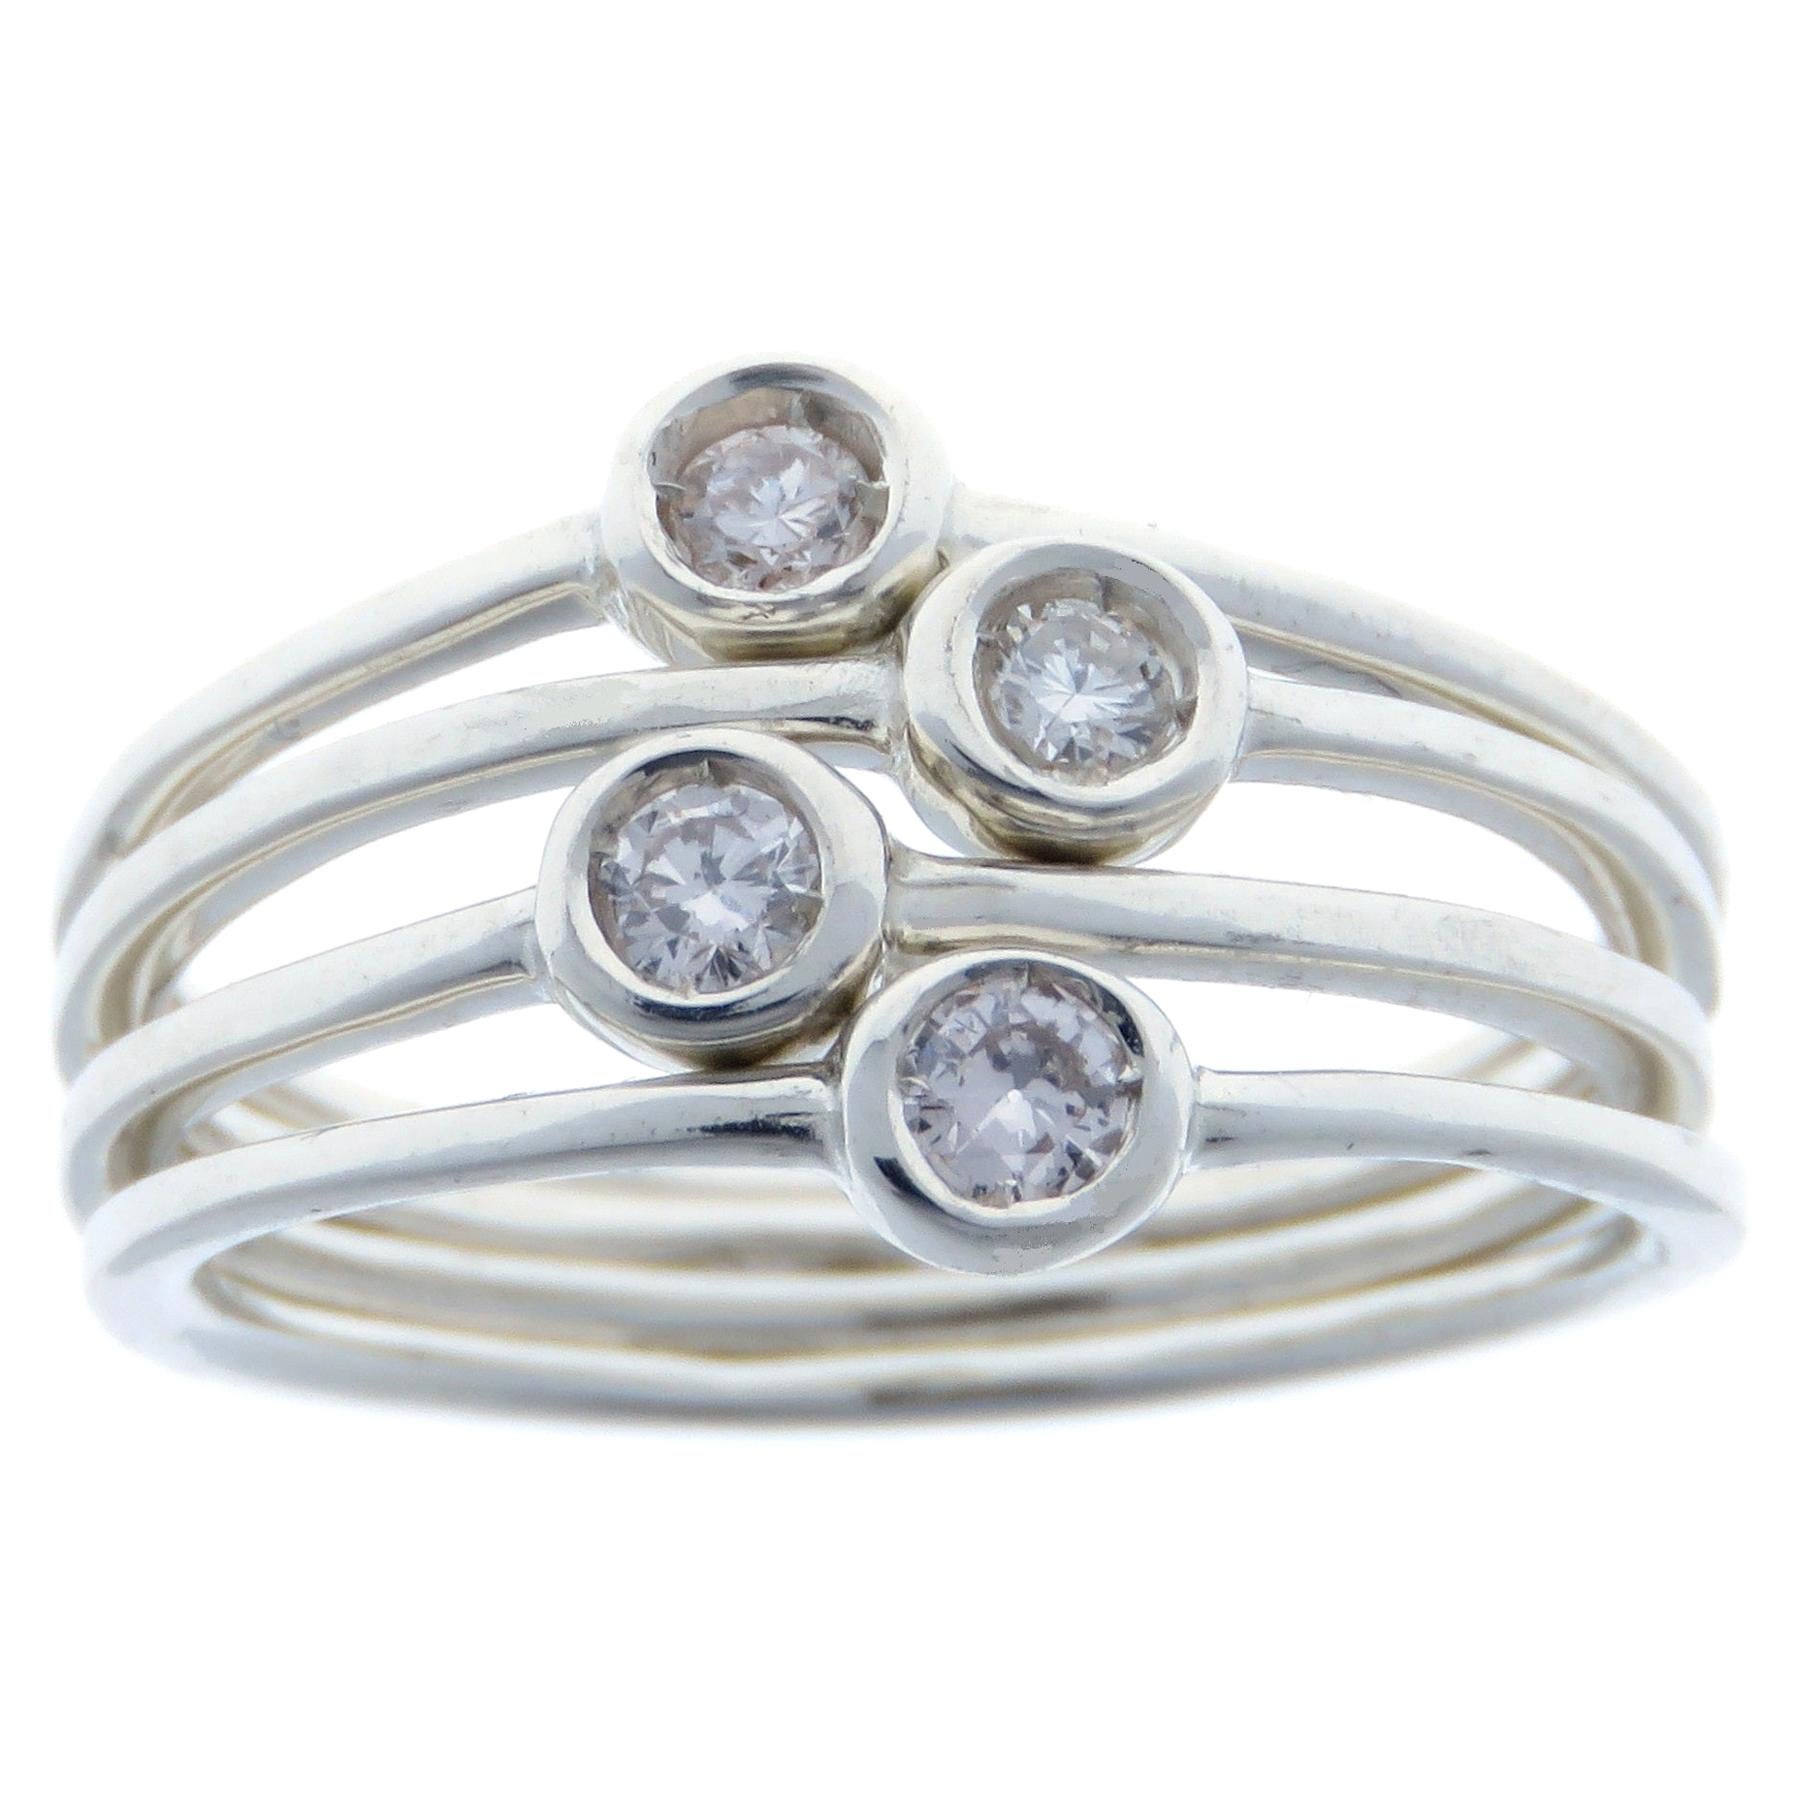 Diamonds White Gold Stacking Ring Handcrafted in Italy by Botta Gioielli